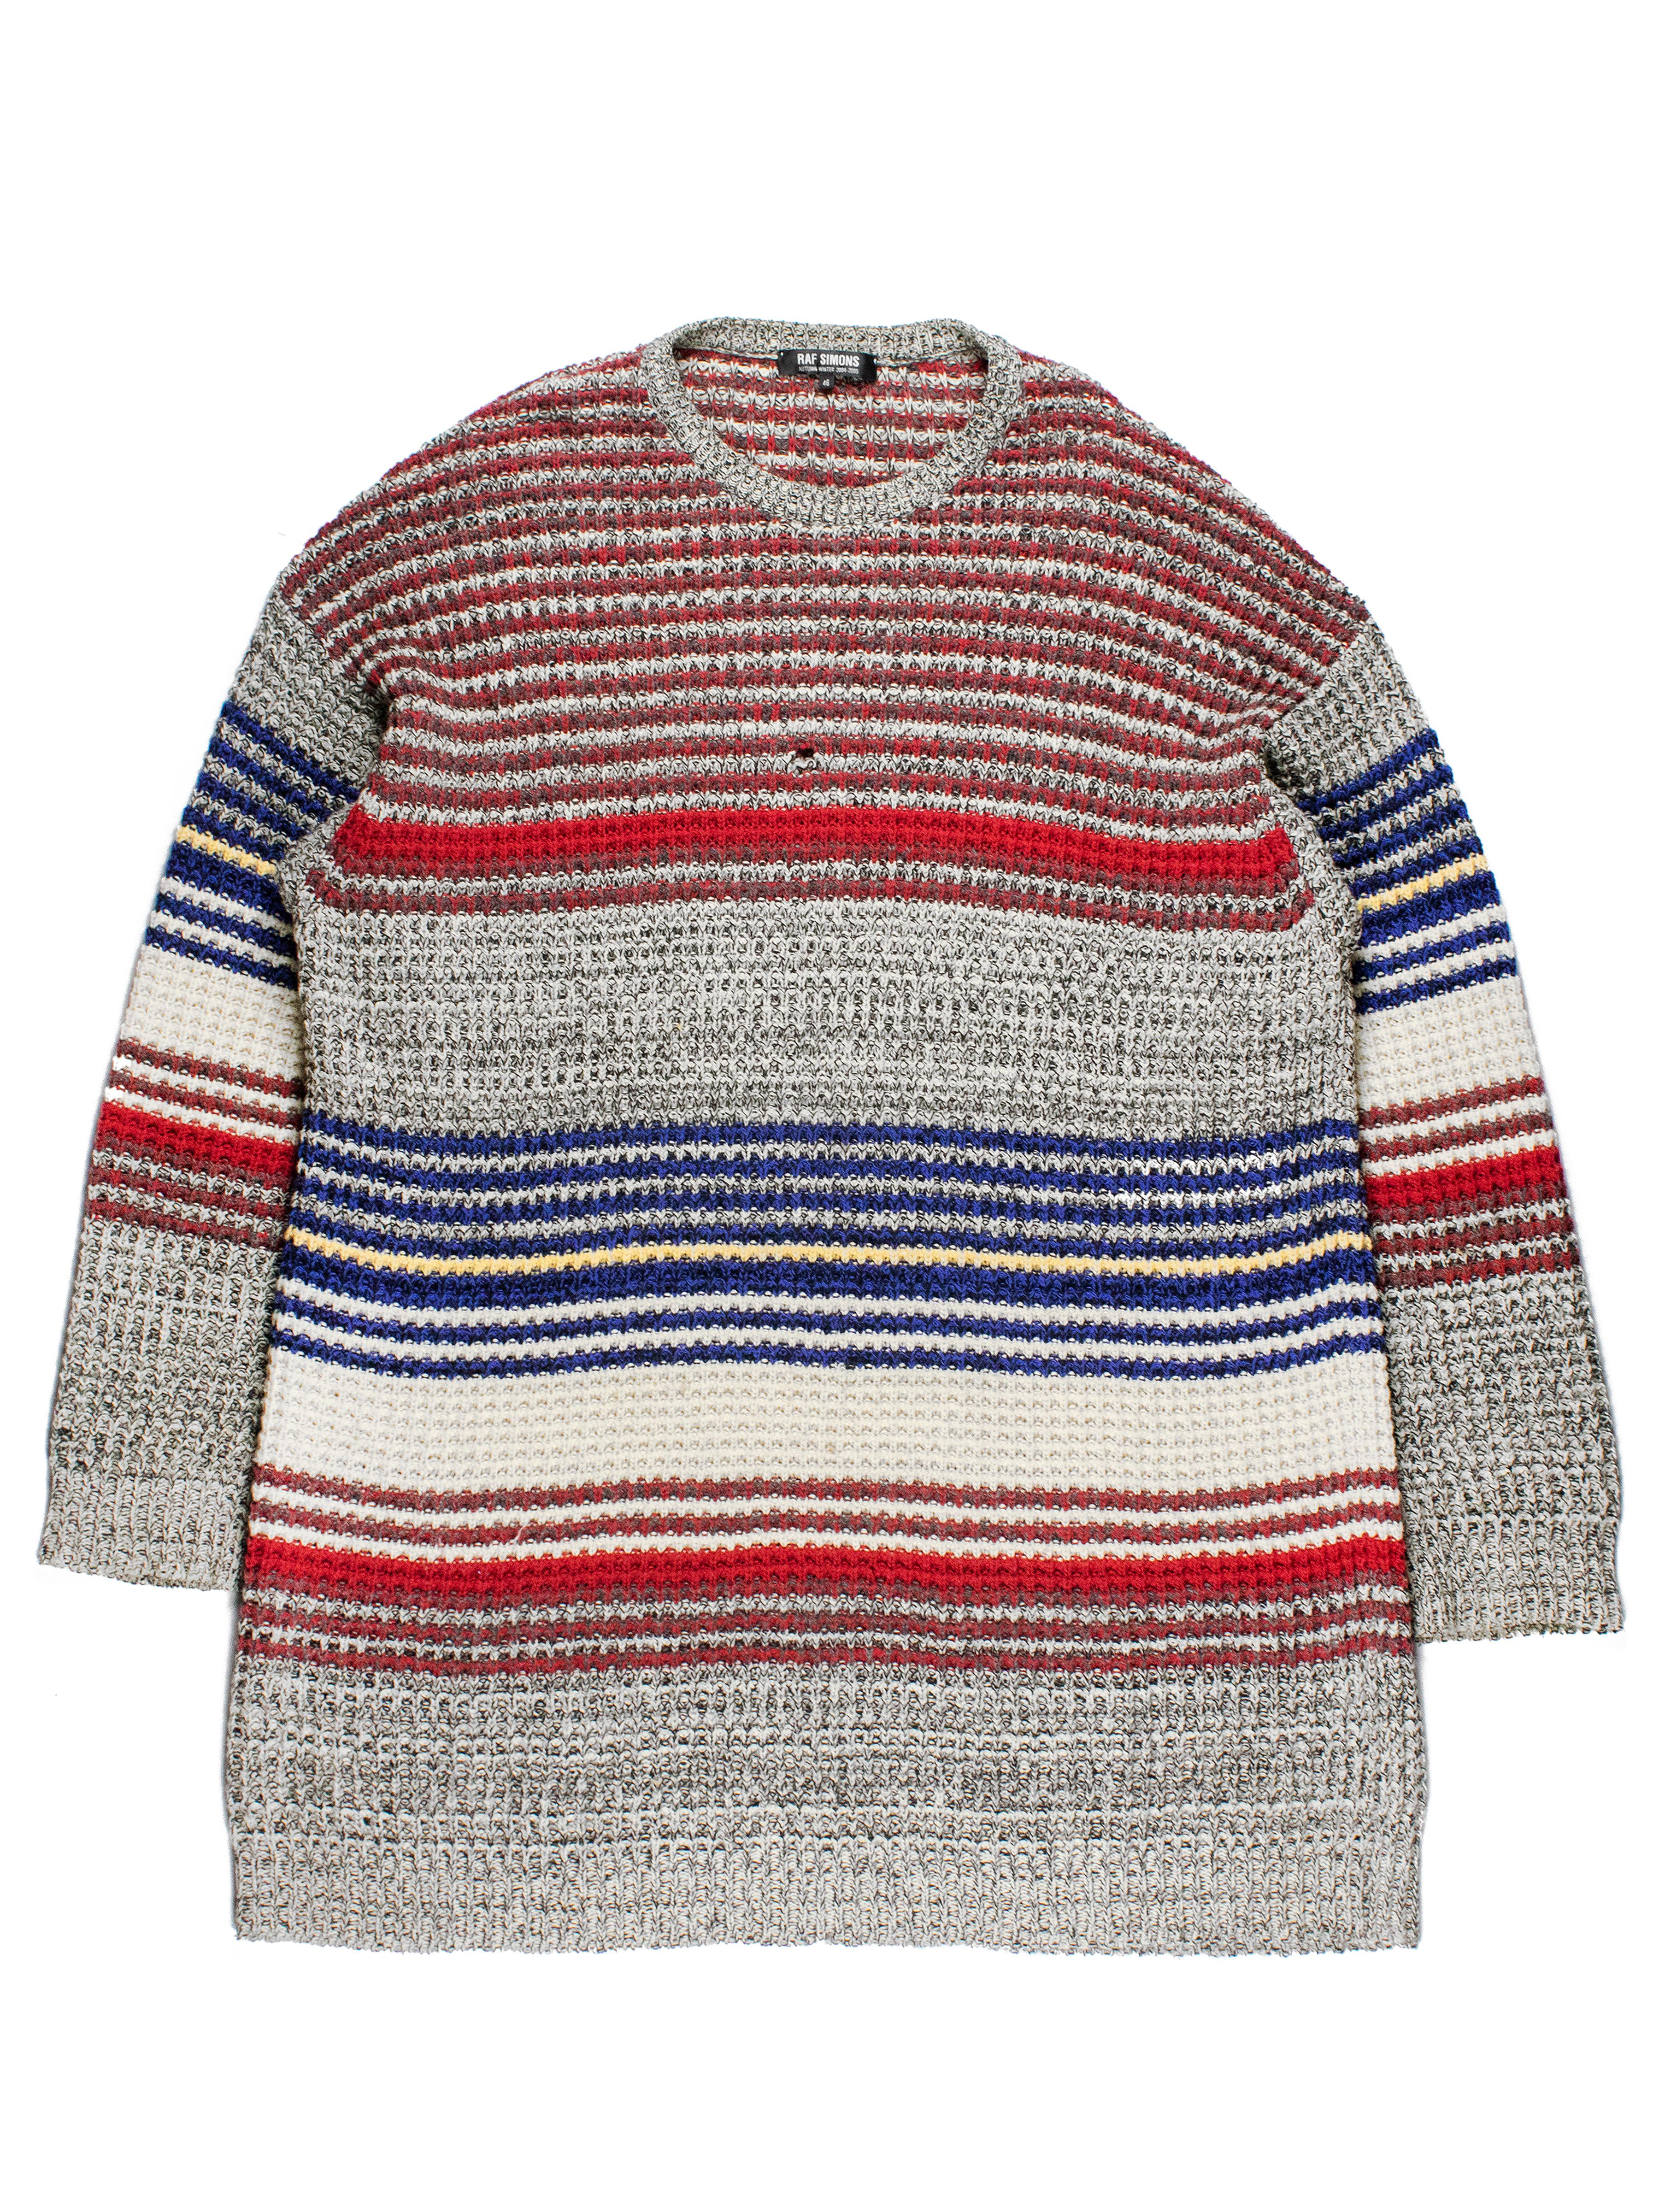 Gray Raf Simons AW2004 Oversized Multicolor Sweater